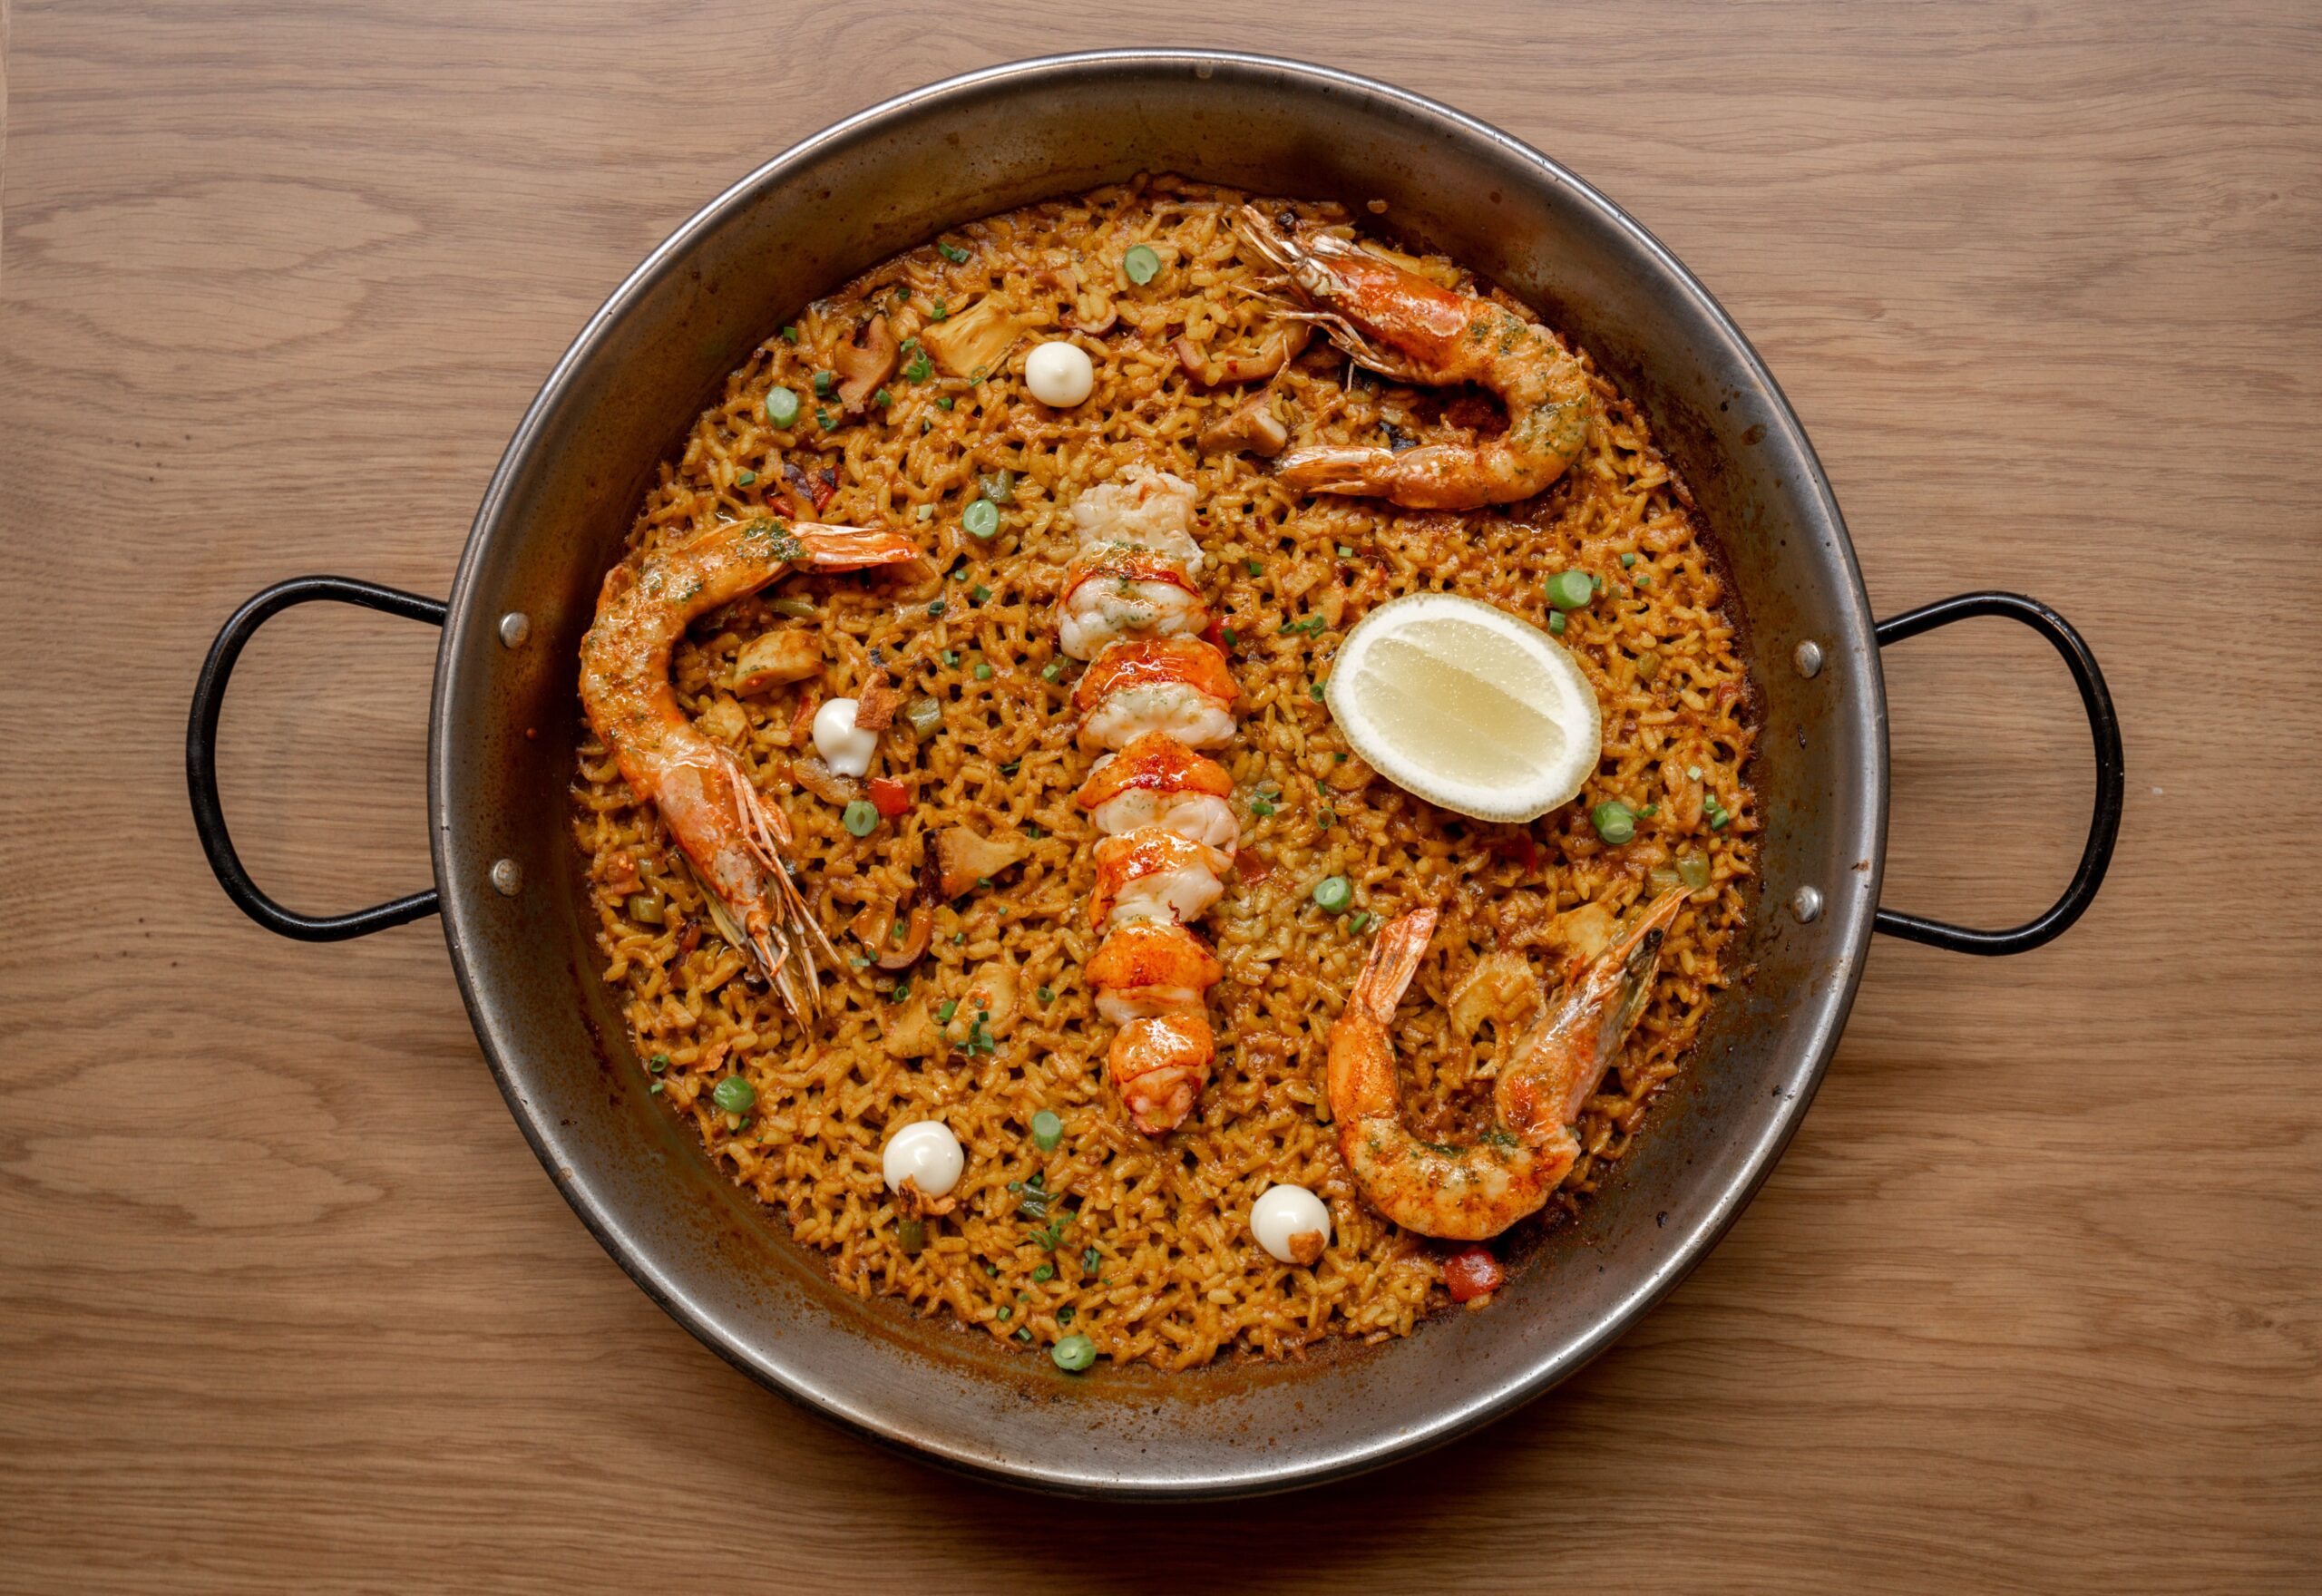 An image of Teleferic's Maine Lobster Paella